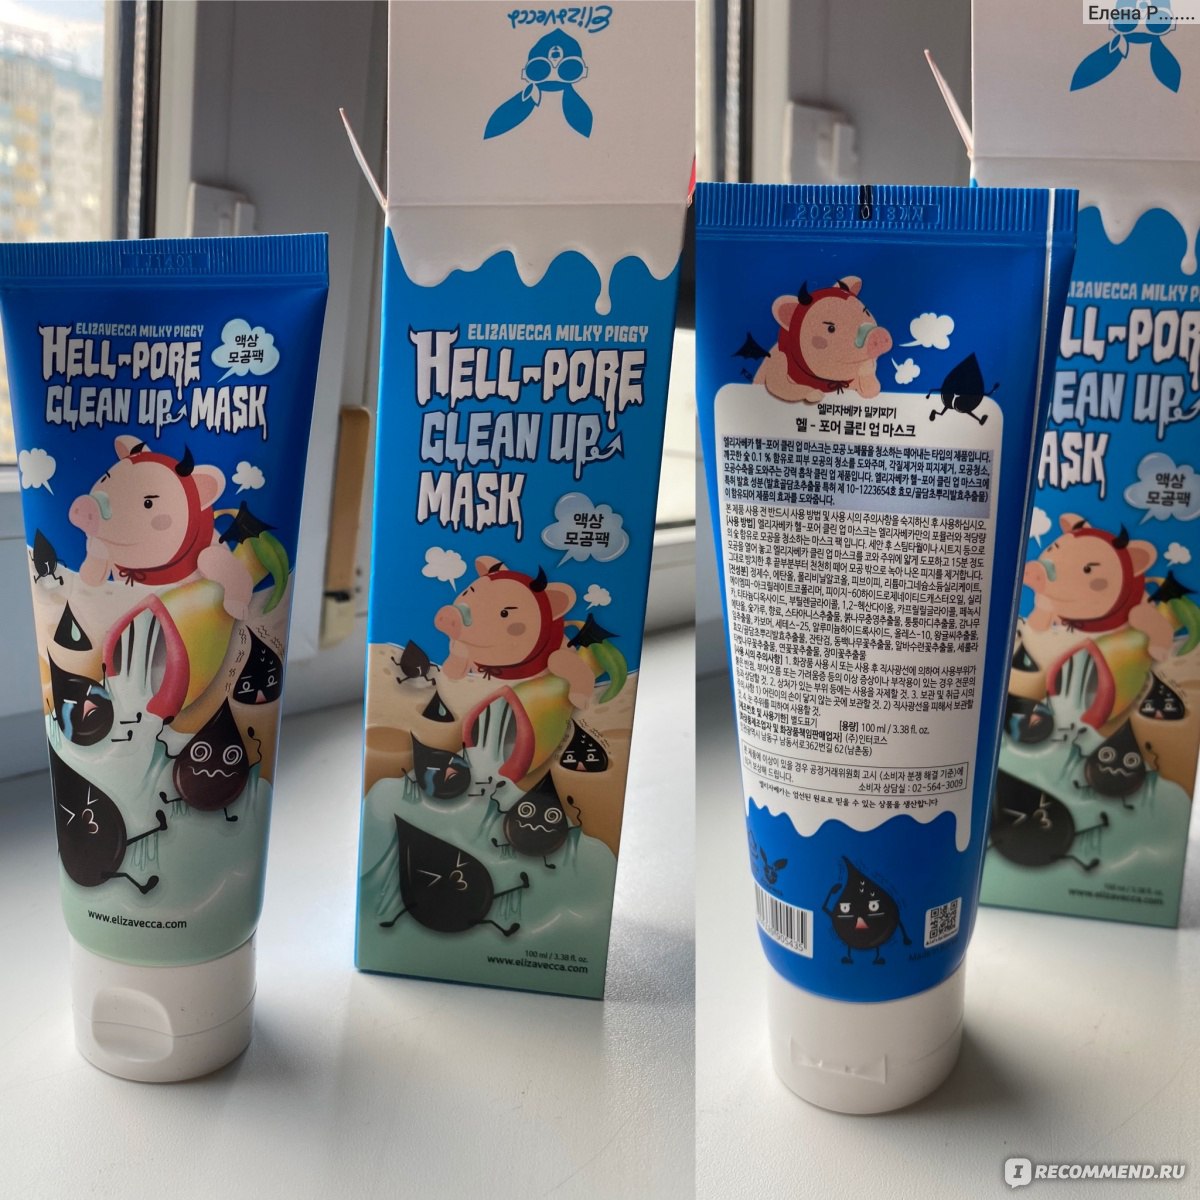 Milky piggy hell pore clean up. Hell Pore clean up Mask. Milky Piggy Elastic Pore Cleansing Foam PNG.